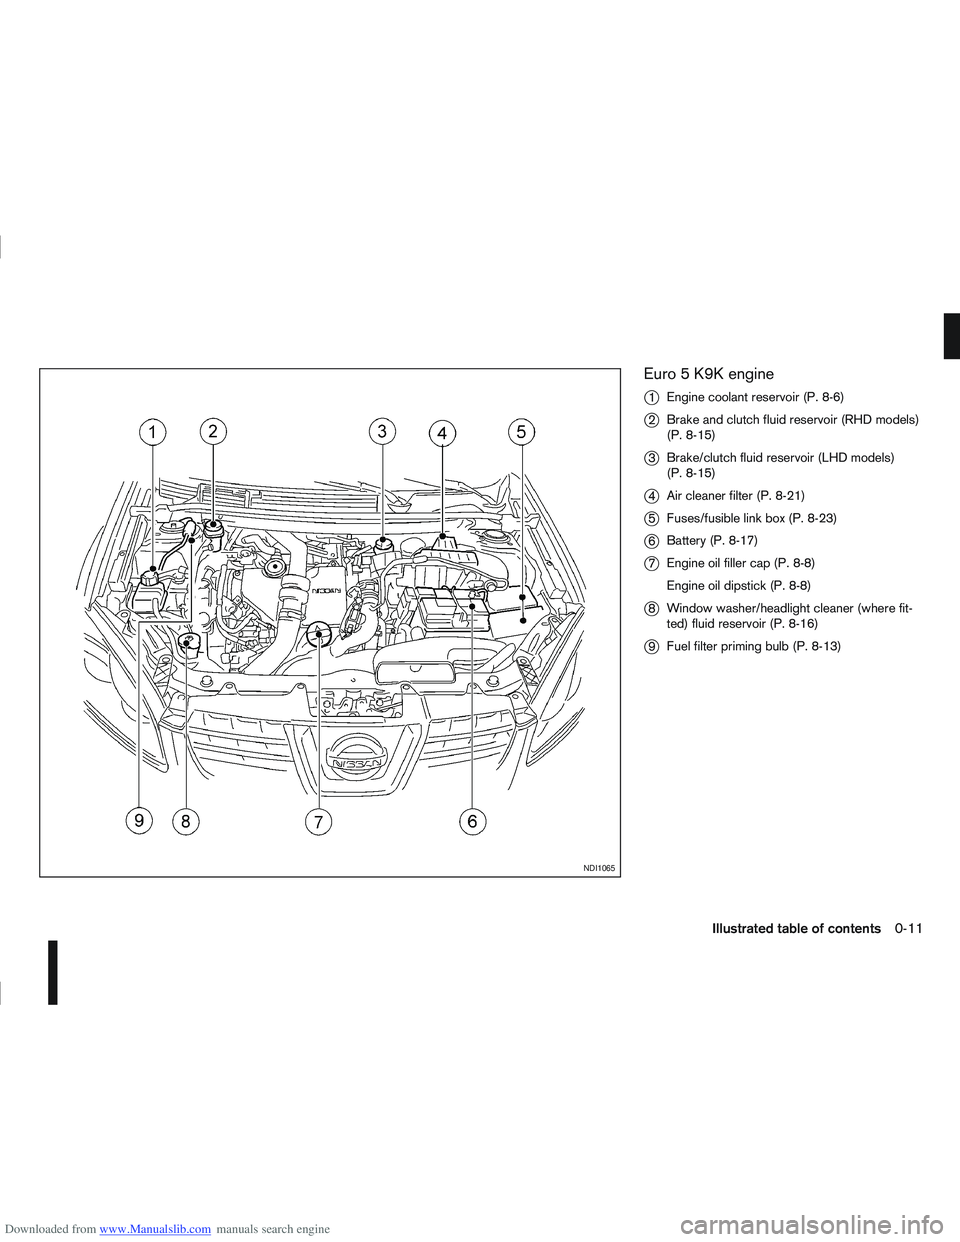 NISSAN QASHQAI 2011  Owners Manual Downloaded from www.Manualslib.com manuals search engine Euro 5 K9K engine
j
1Engine coolant reservoir (P. 8-6)
j2Brake and clutch fluid reservoir (RHD models)
(P. 8-15)
j3Brake/clutch fluid reservoir